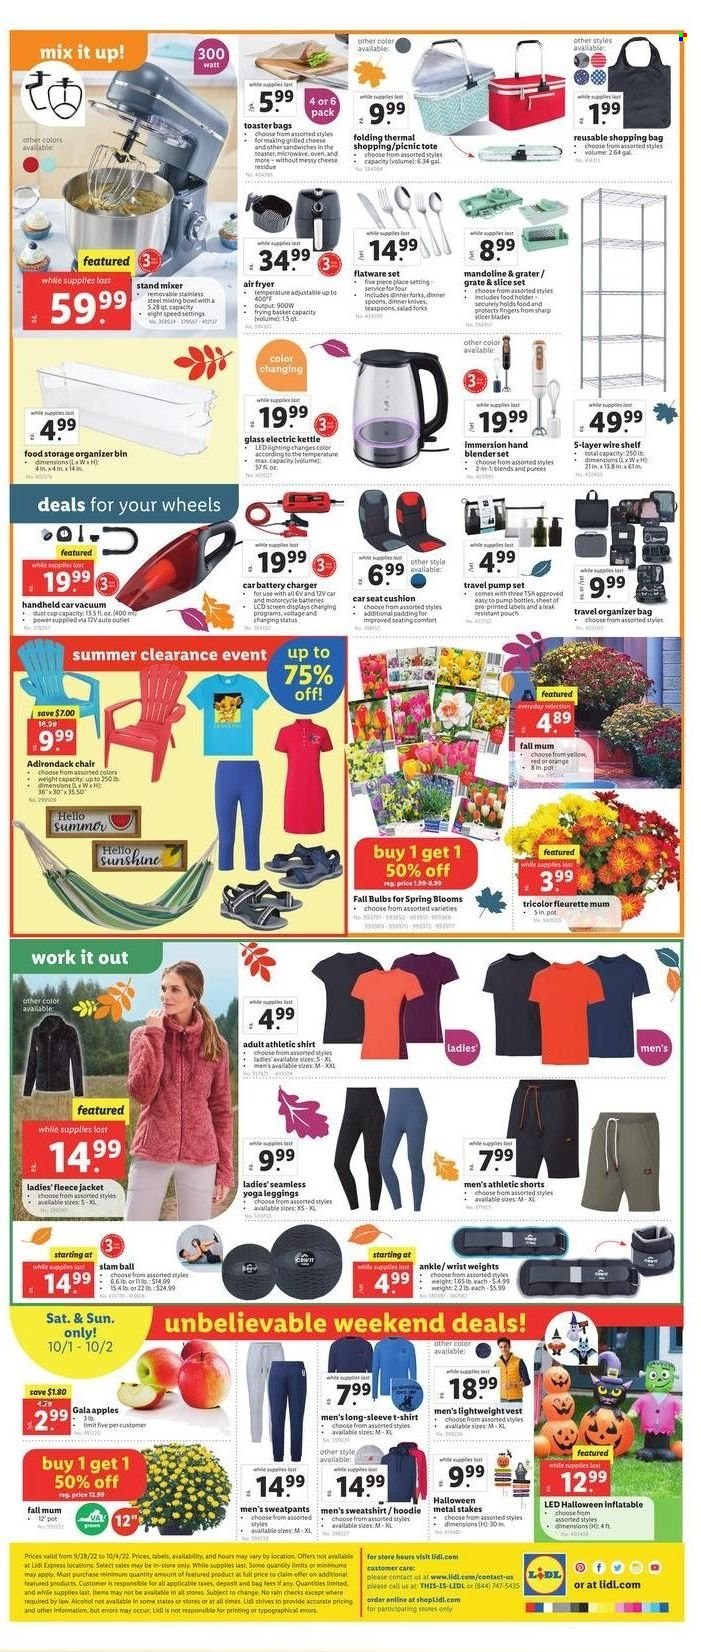 thumbnail - Lidl Flyer - 09/28/2022 - 10/04/2022 - Sales products - apples, Gala, oranges, sandwich, cheese, Sunshine, kettle, Mum, basket, bin, knife, holder, shopping bag, flatware, flatware set, spoon, pot, handy grater, Sharp, battery charger, bulb, cushion, hoodie, mixer, stand mixer, air fryer, toaster, chair, tote, Halloween, shorts, t-shirt, vest, sweatshirt, sweatpants, leggings, motorcycle, baby car seat, lighting, car battery. Page 2.